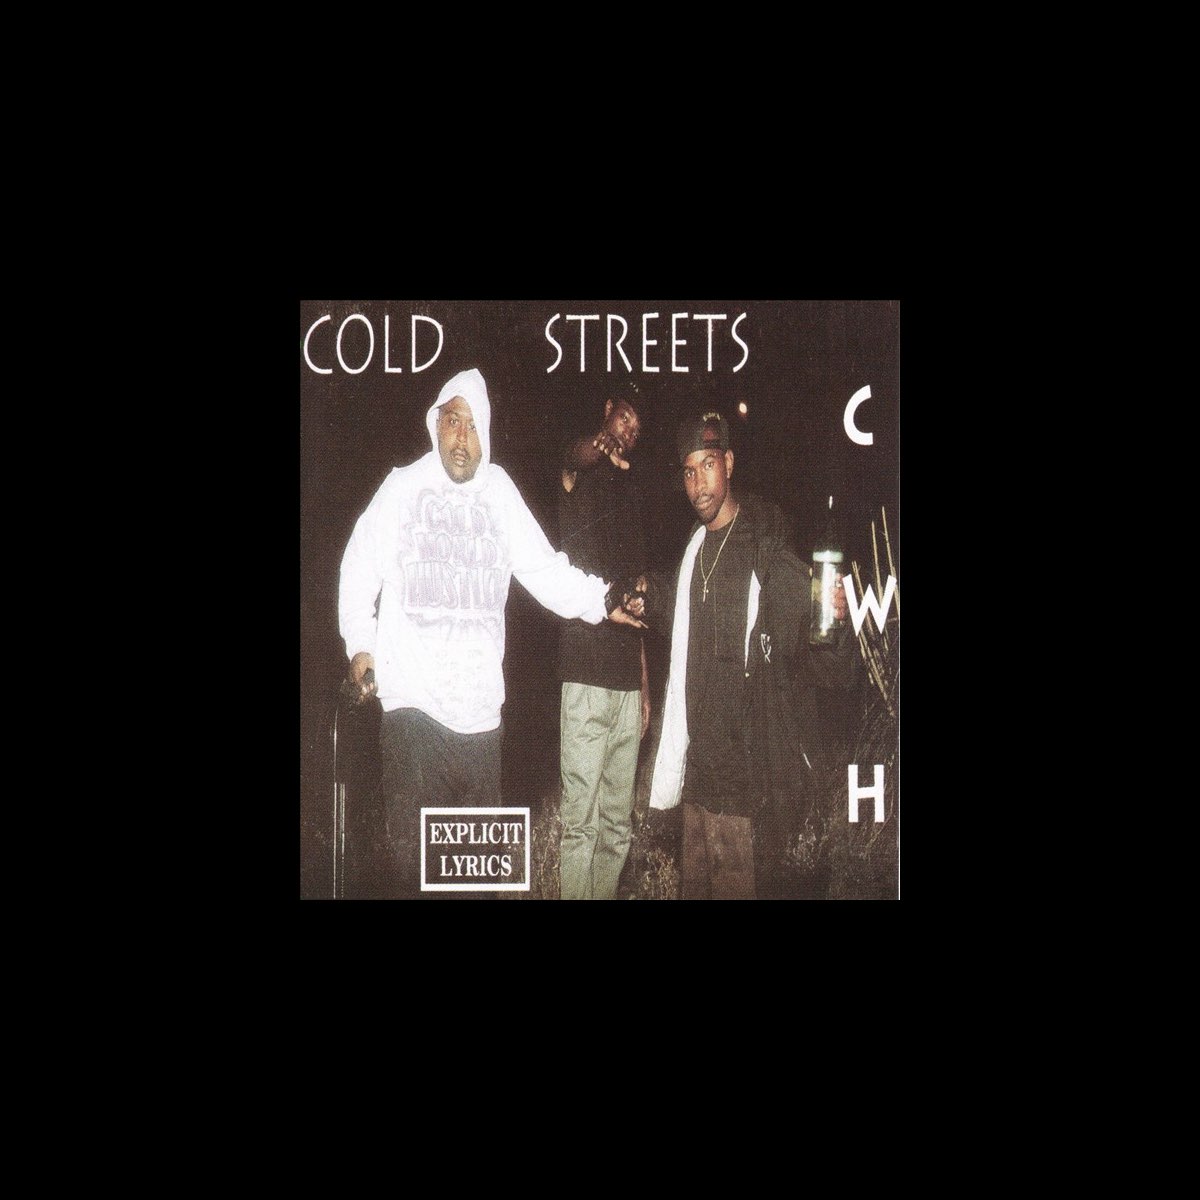 Cold Streets - Album by Cold World Hustlers - Apple Music